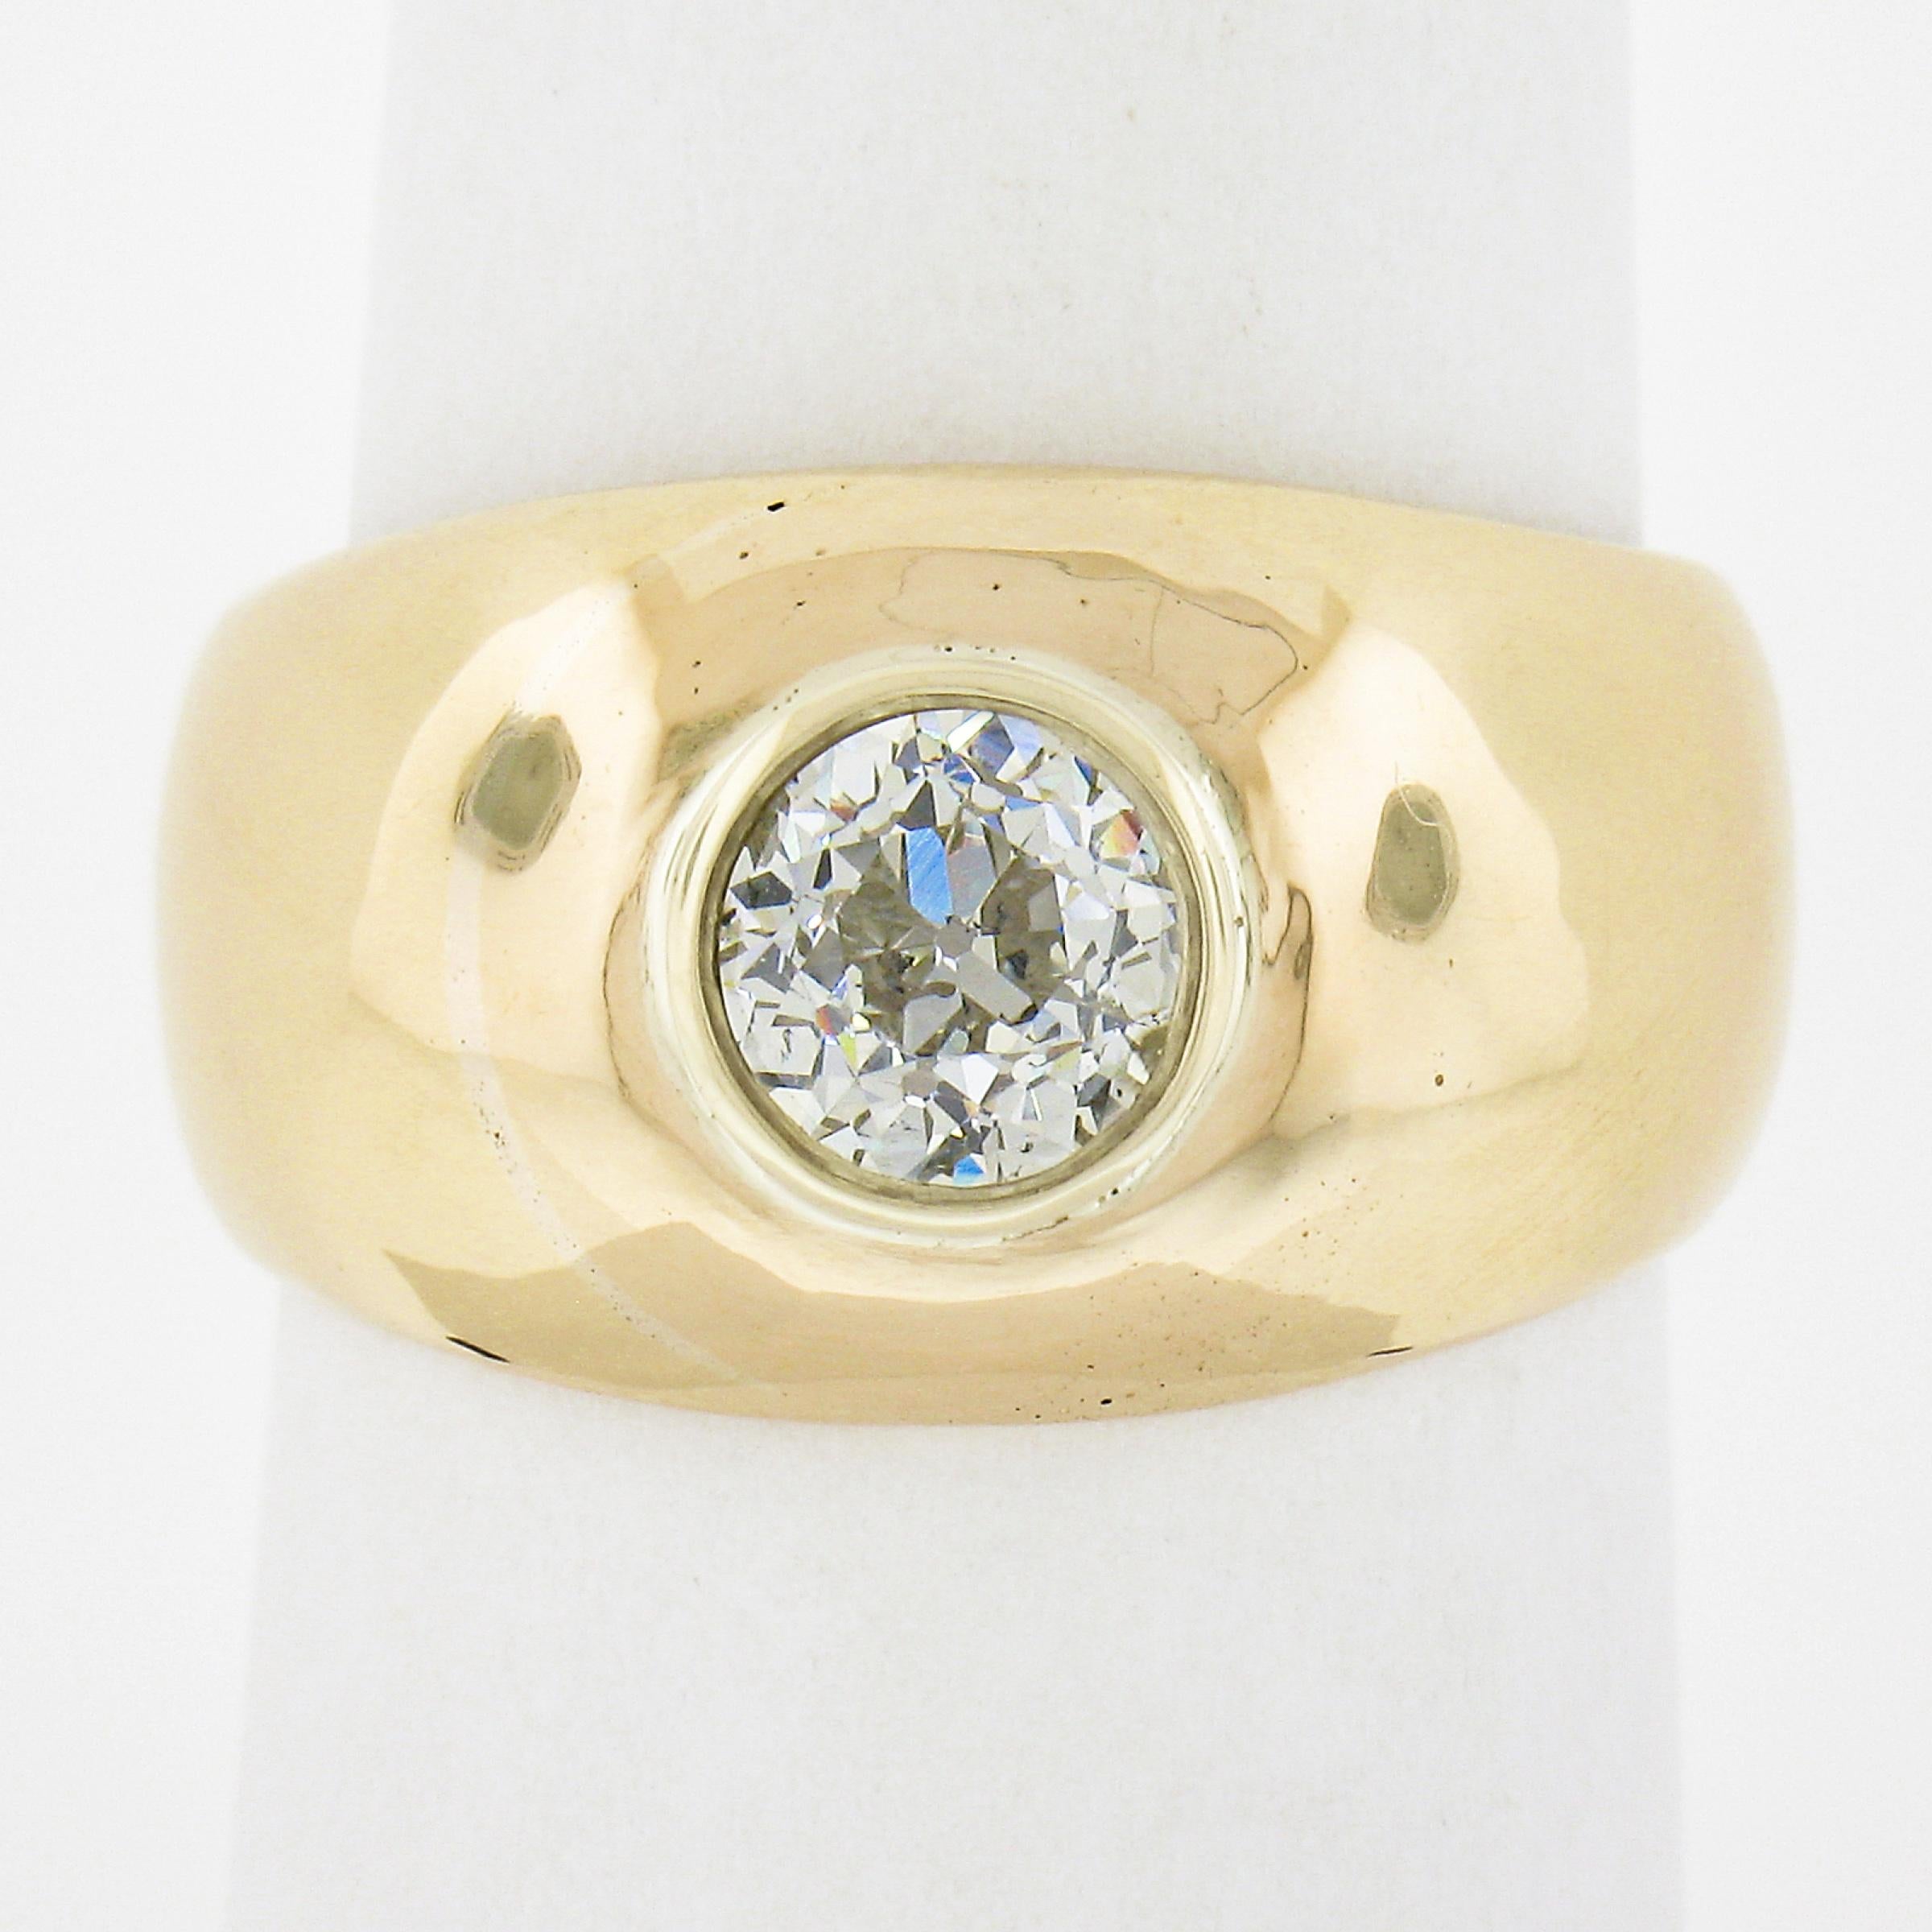 --Stone(s):--
(1) Natural Genuine Diamond - Old European Cut - Bezel Set - L/M Color - SI2 Clarity
Total Carat Weight:	1.02 (exact)

Material: Solid 18k Yellow Gold 
Weight: 12.87 Grams
Ring Size: 7.5 (Fitted on a finger. We can custom size this